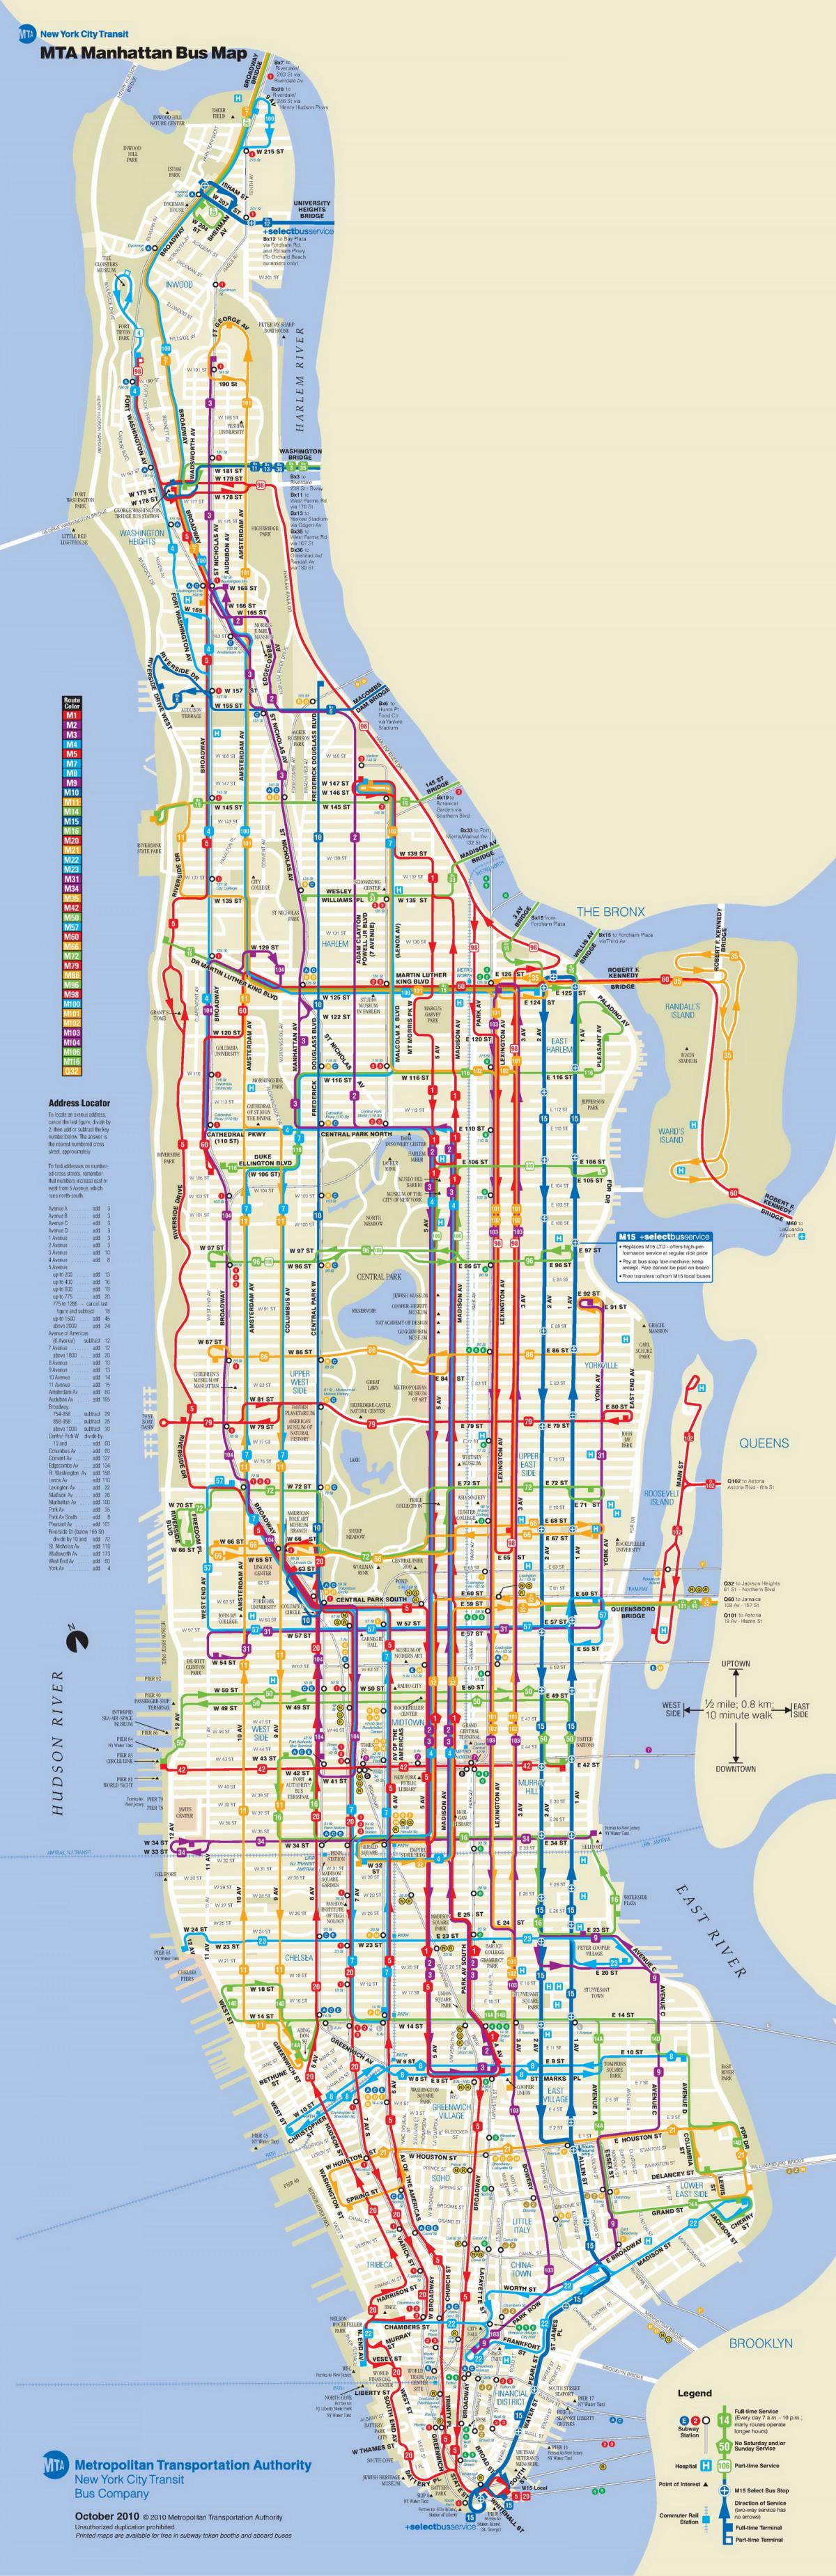 Manhattan bus map with stops